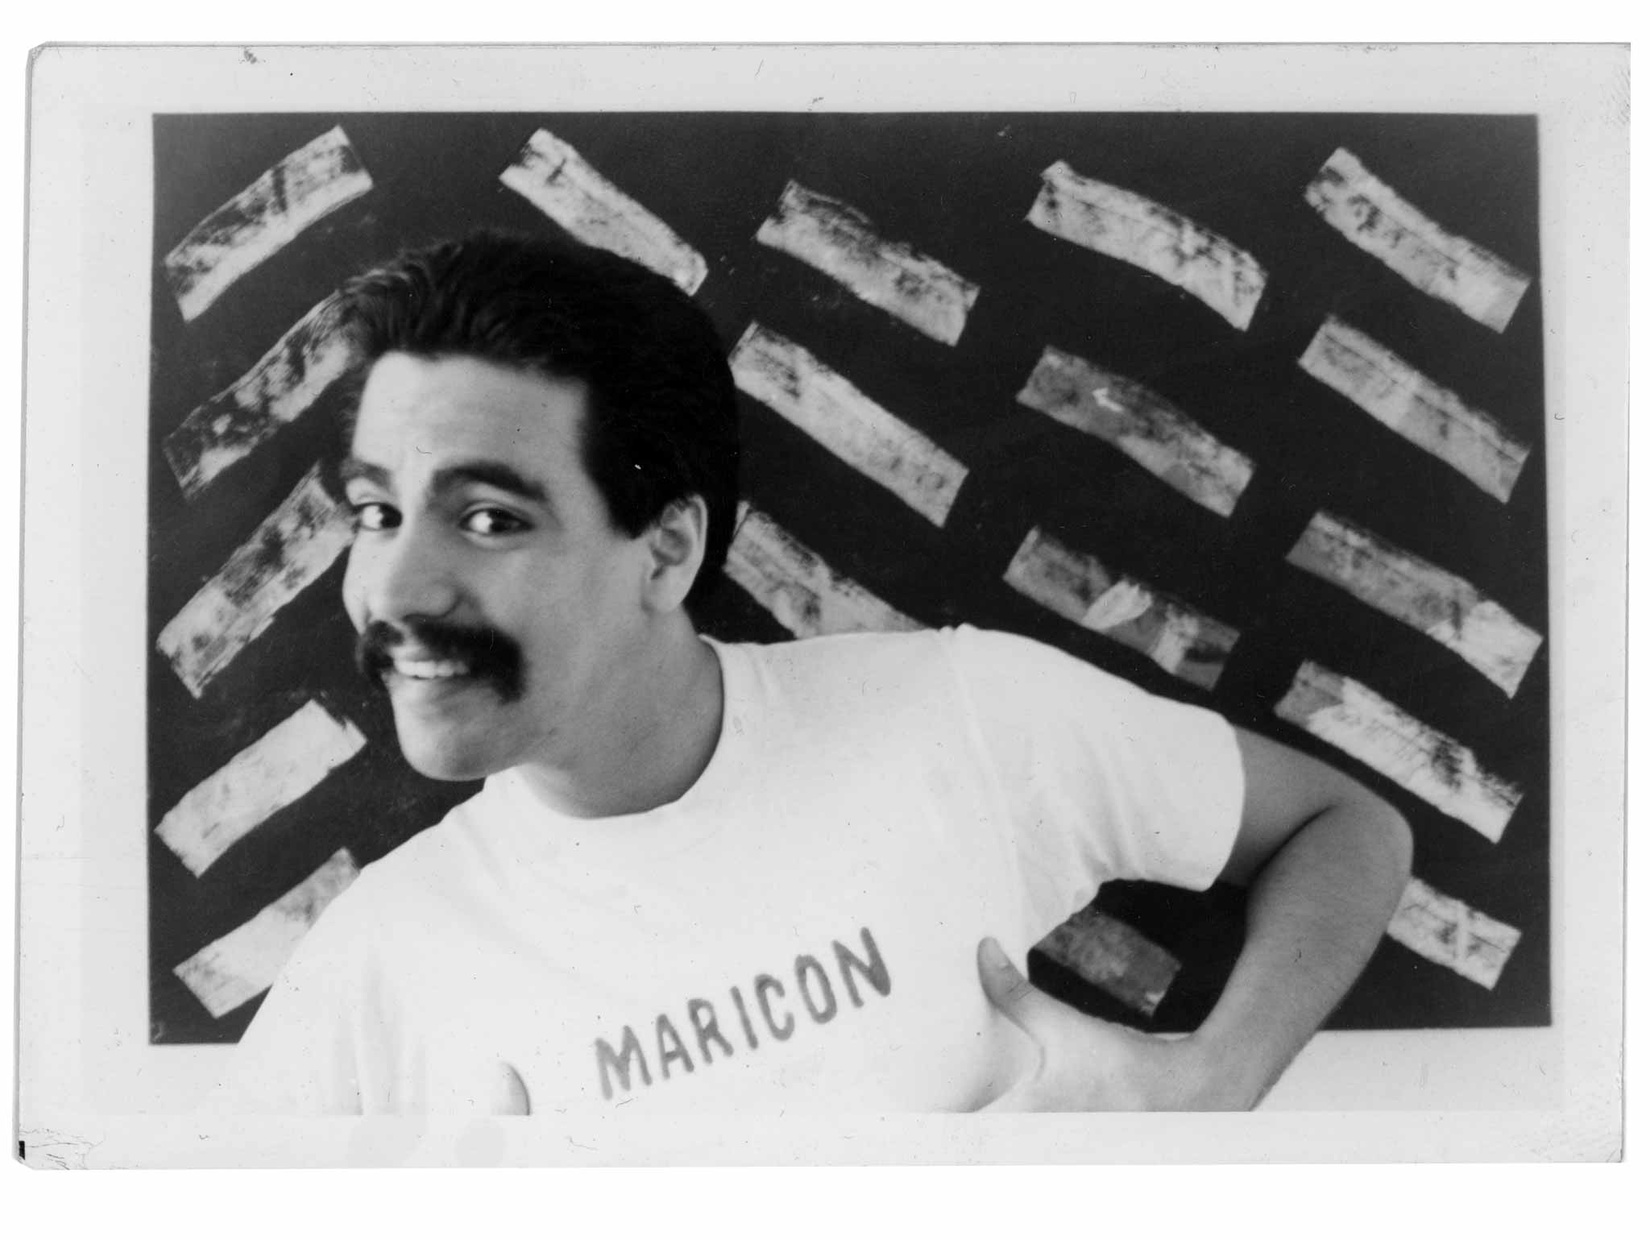 A black and white photo of a Latino man smiling standing and wearing a shirt that says "MARICON."